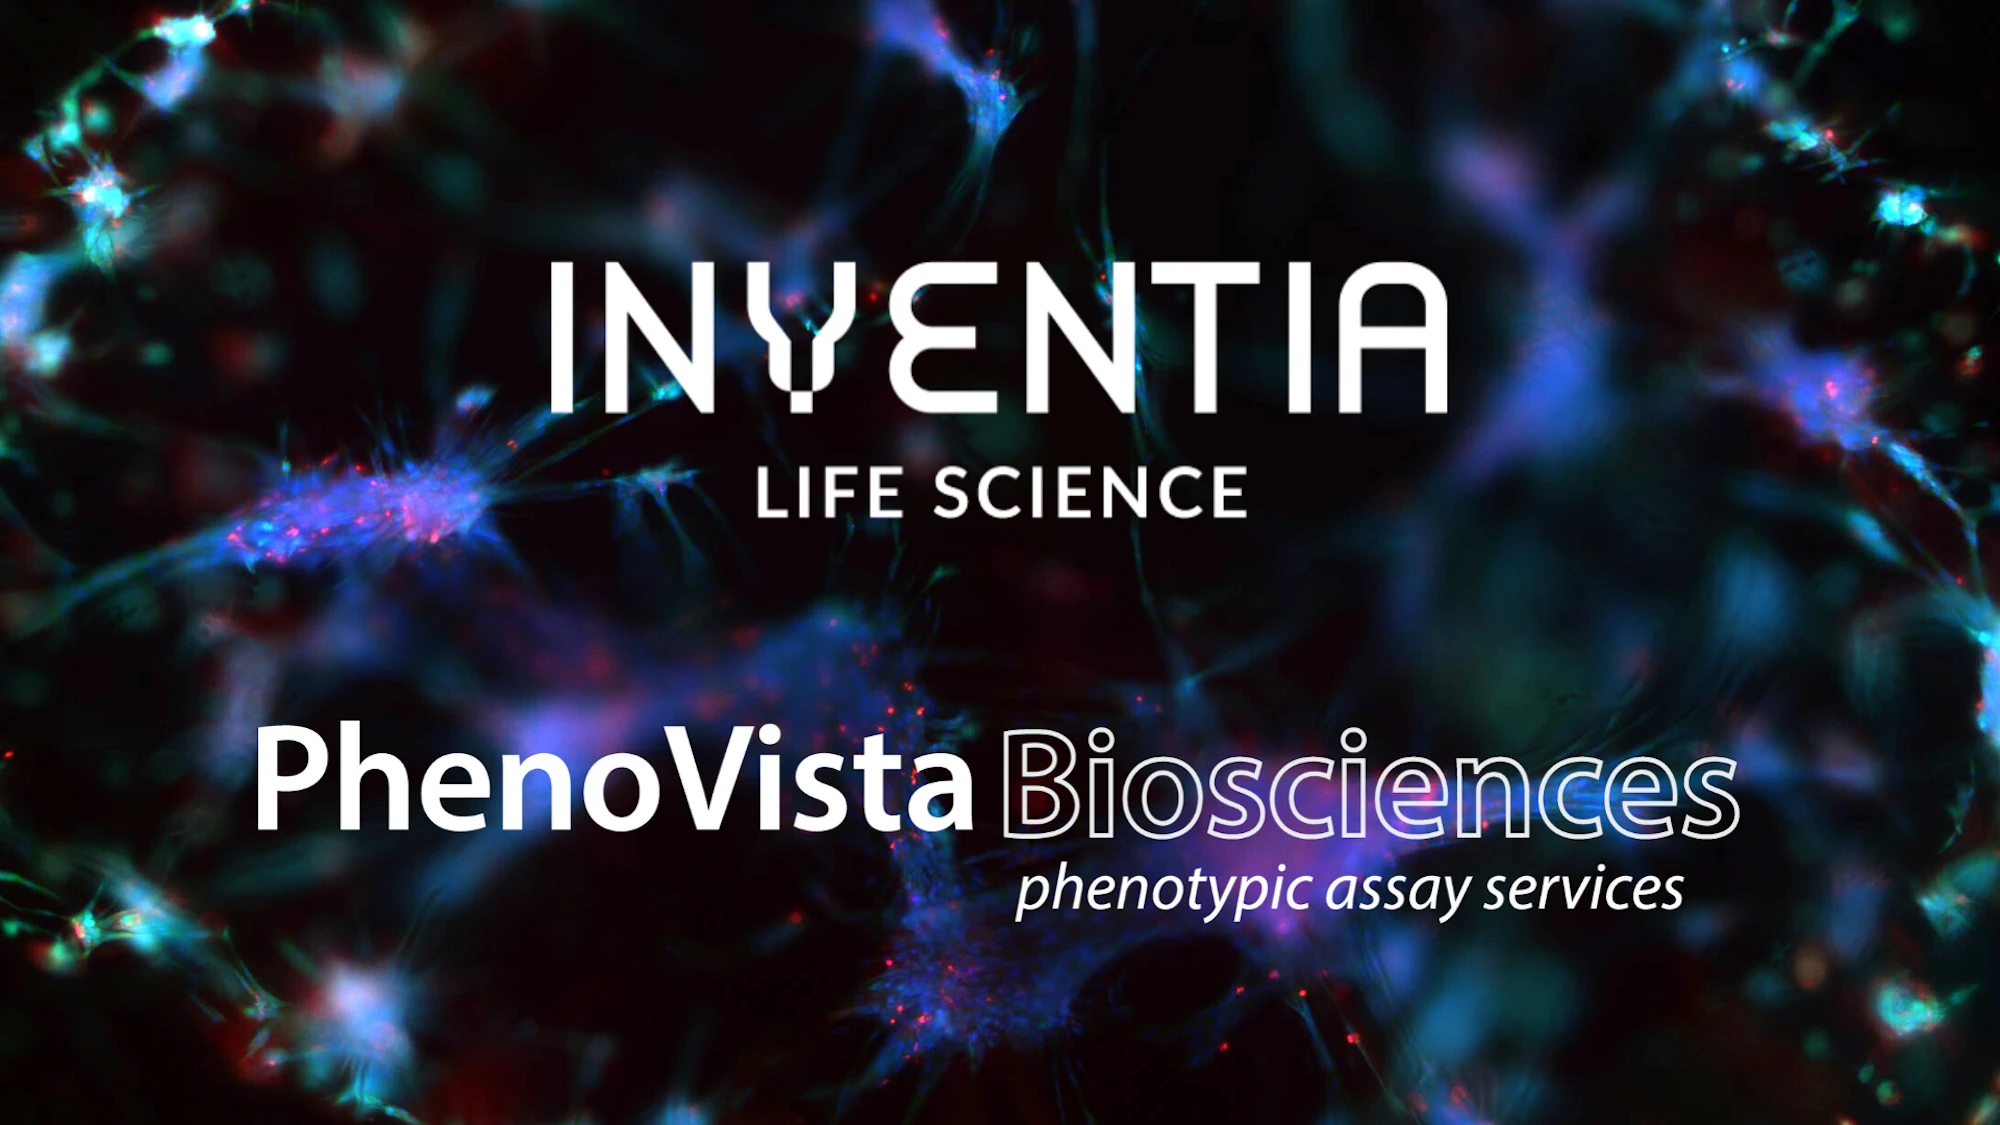 Inventia Life Science Announces Partnership with PhenoVista Biosciences to Accelerate Preclinical Research with 3D Cell Models